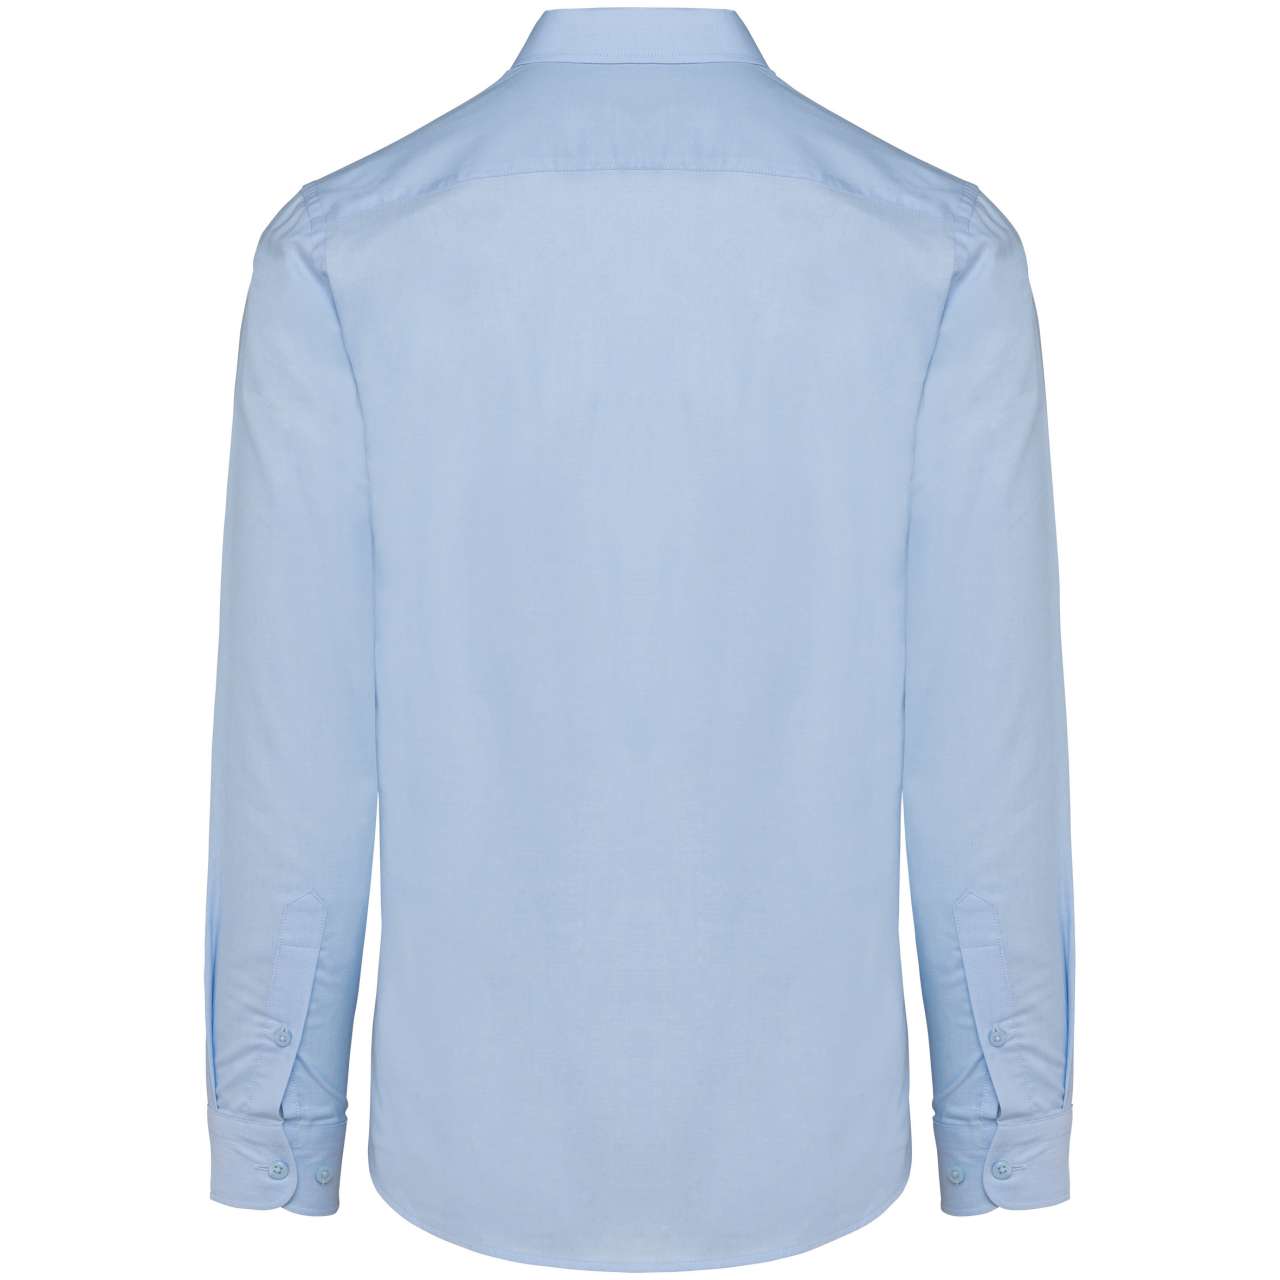 MEN LONG-SLEEVED EASY CARE SHIRT WITHOUT POCKET s logom 